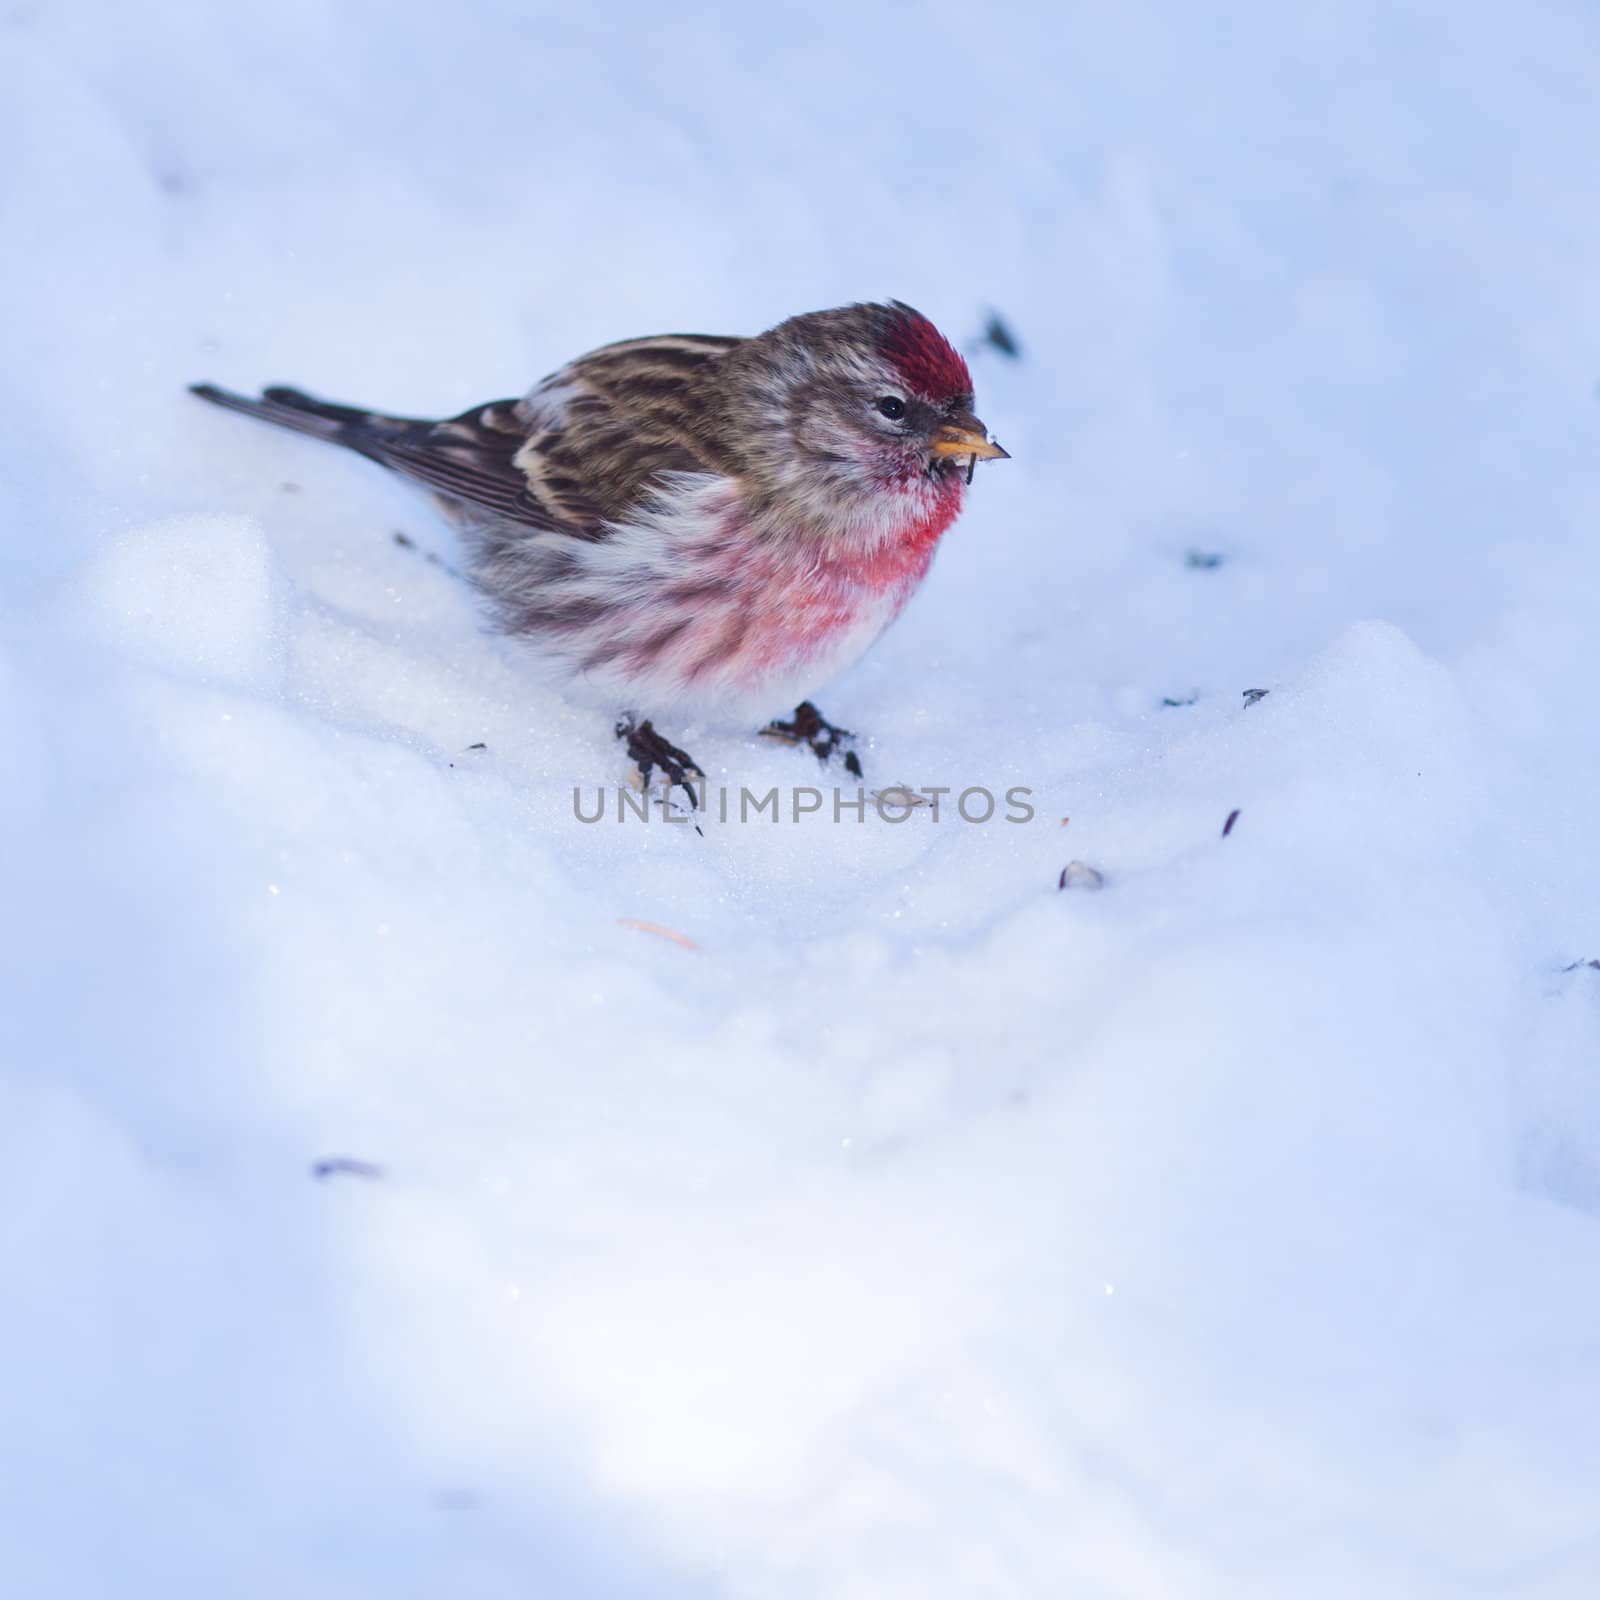 Common redpoll Carduelis flammea in winter snow by PiLens